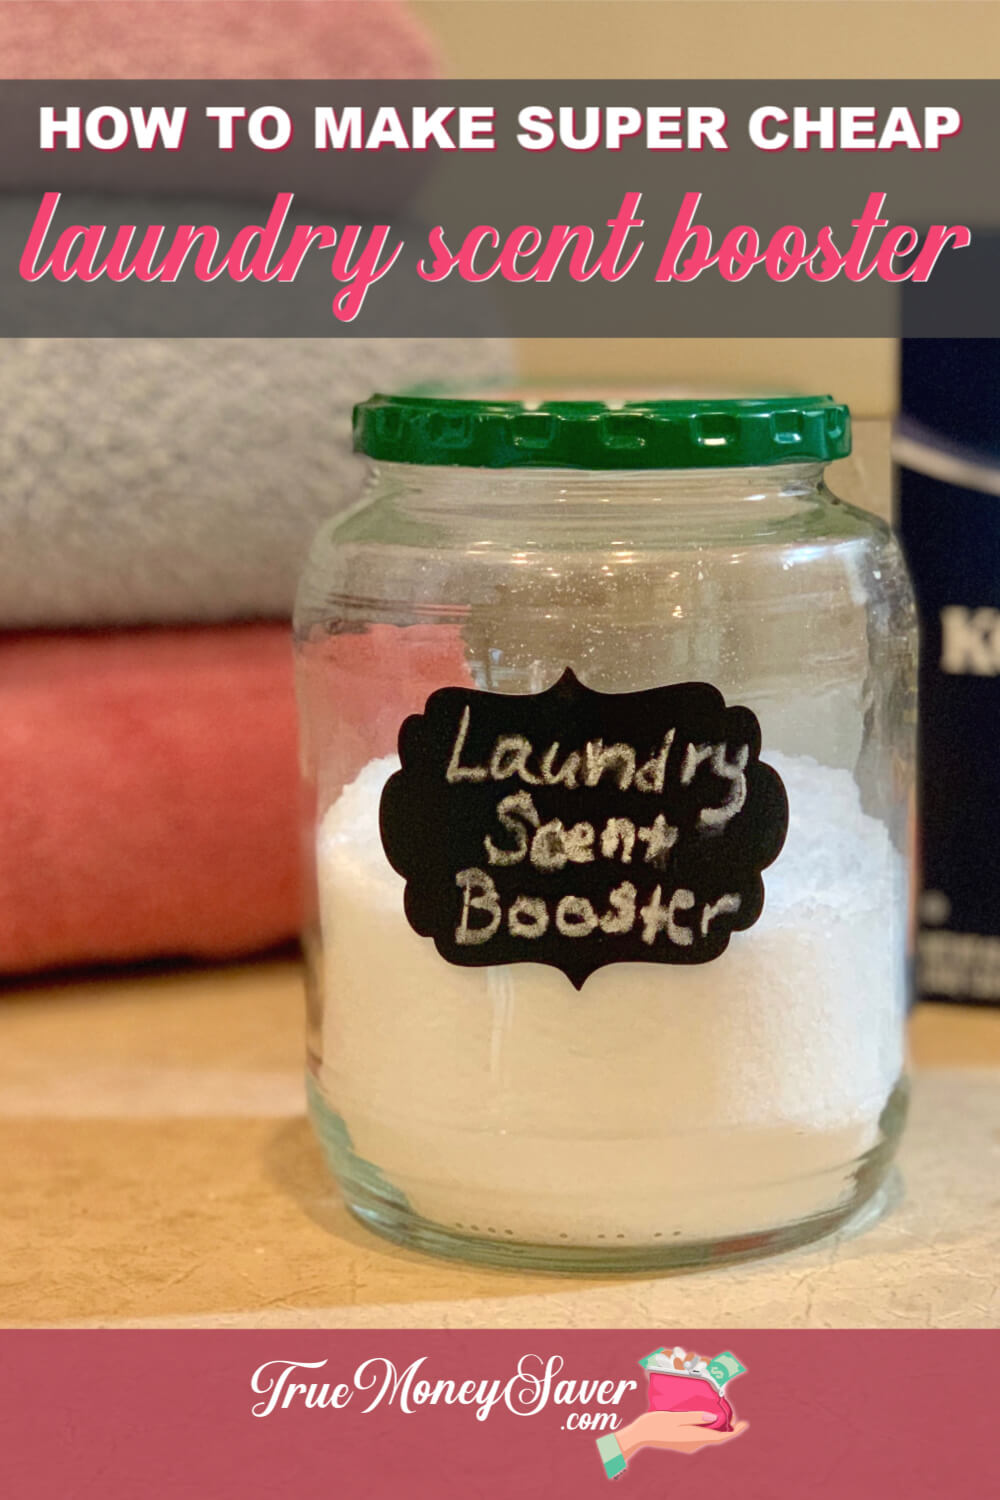 How To Make Super Cheap Laundry Scent Boosters